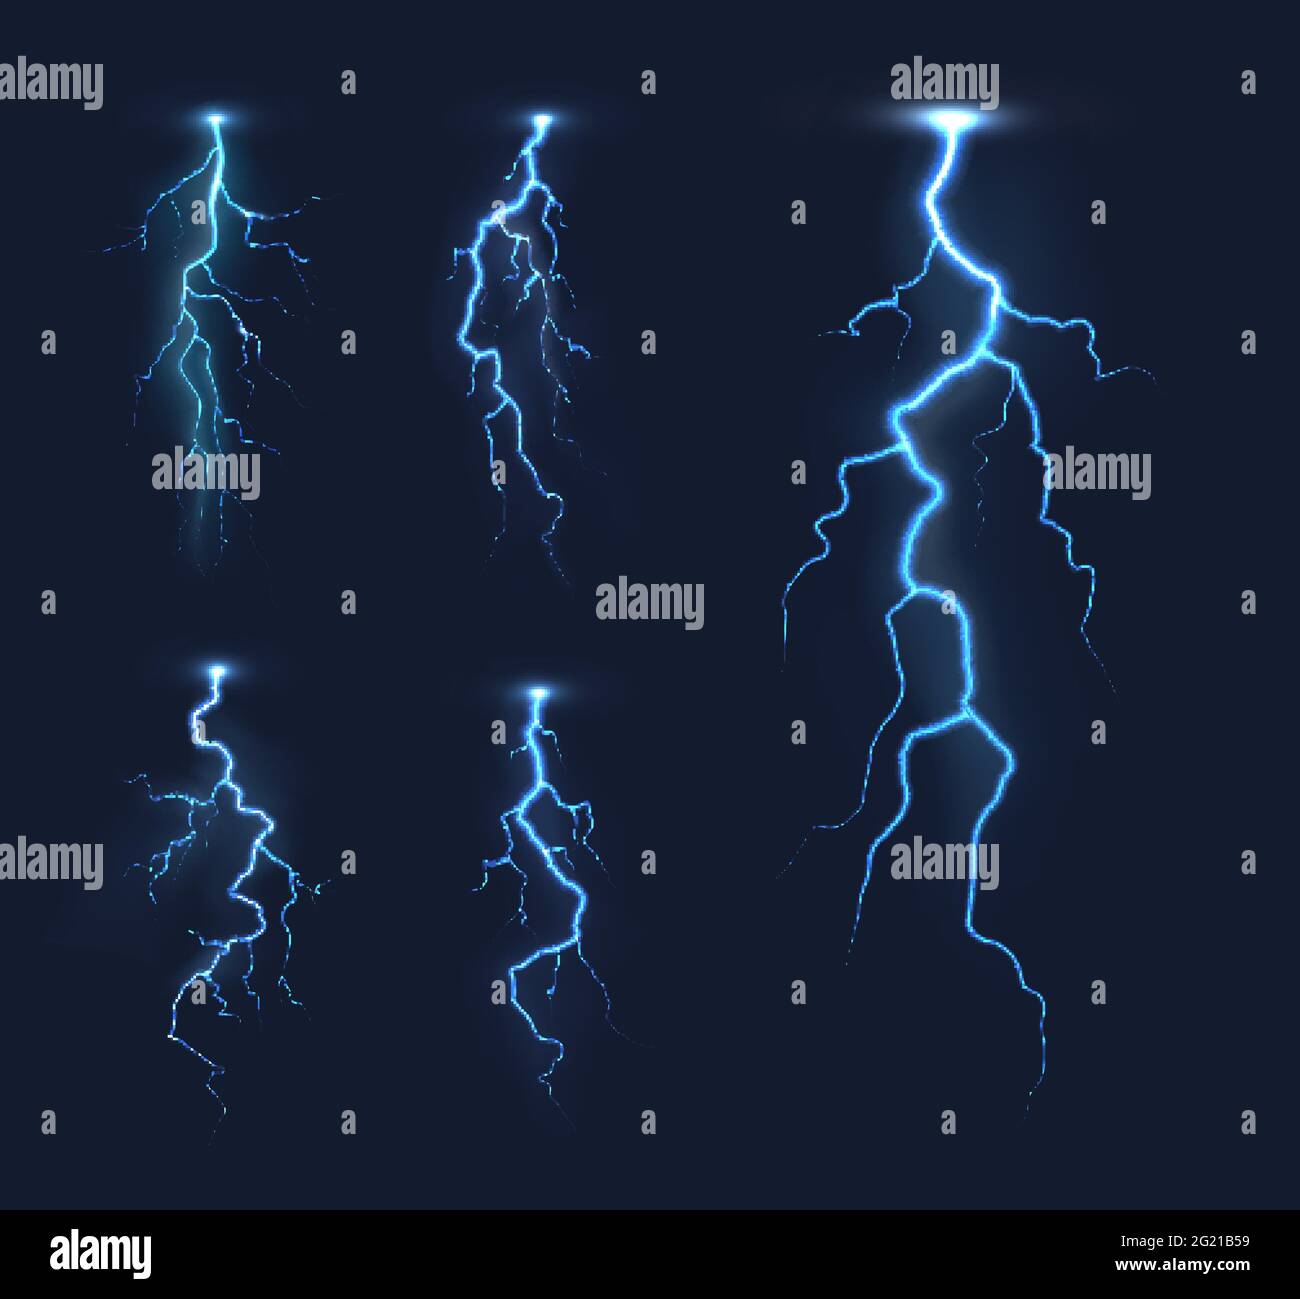 Lightning thunderbolts, thunderstorm bolt vector light effects. Rainstorm electric discharge, lightning strike or energy flash with bright, glowing bl Stock Vector